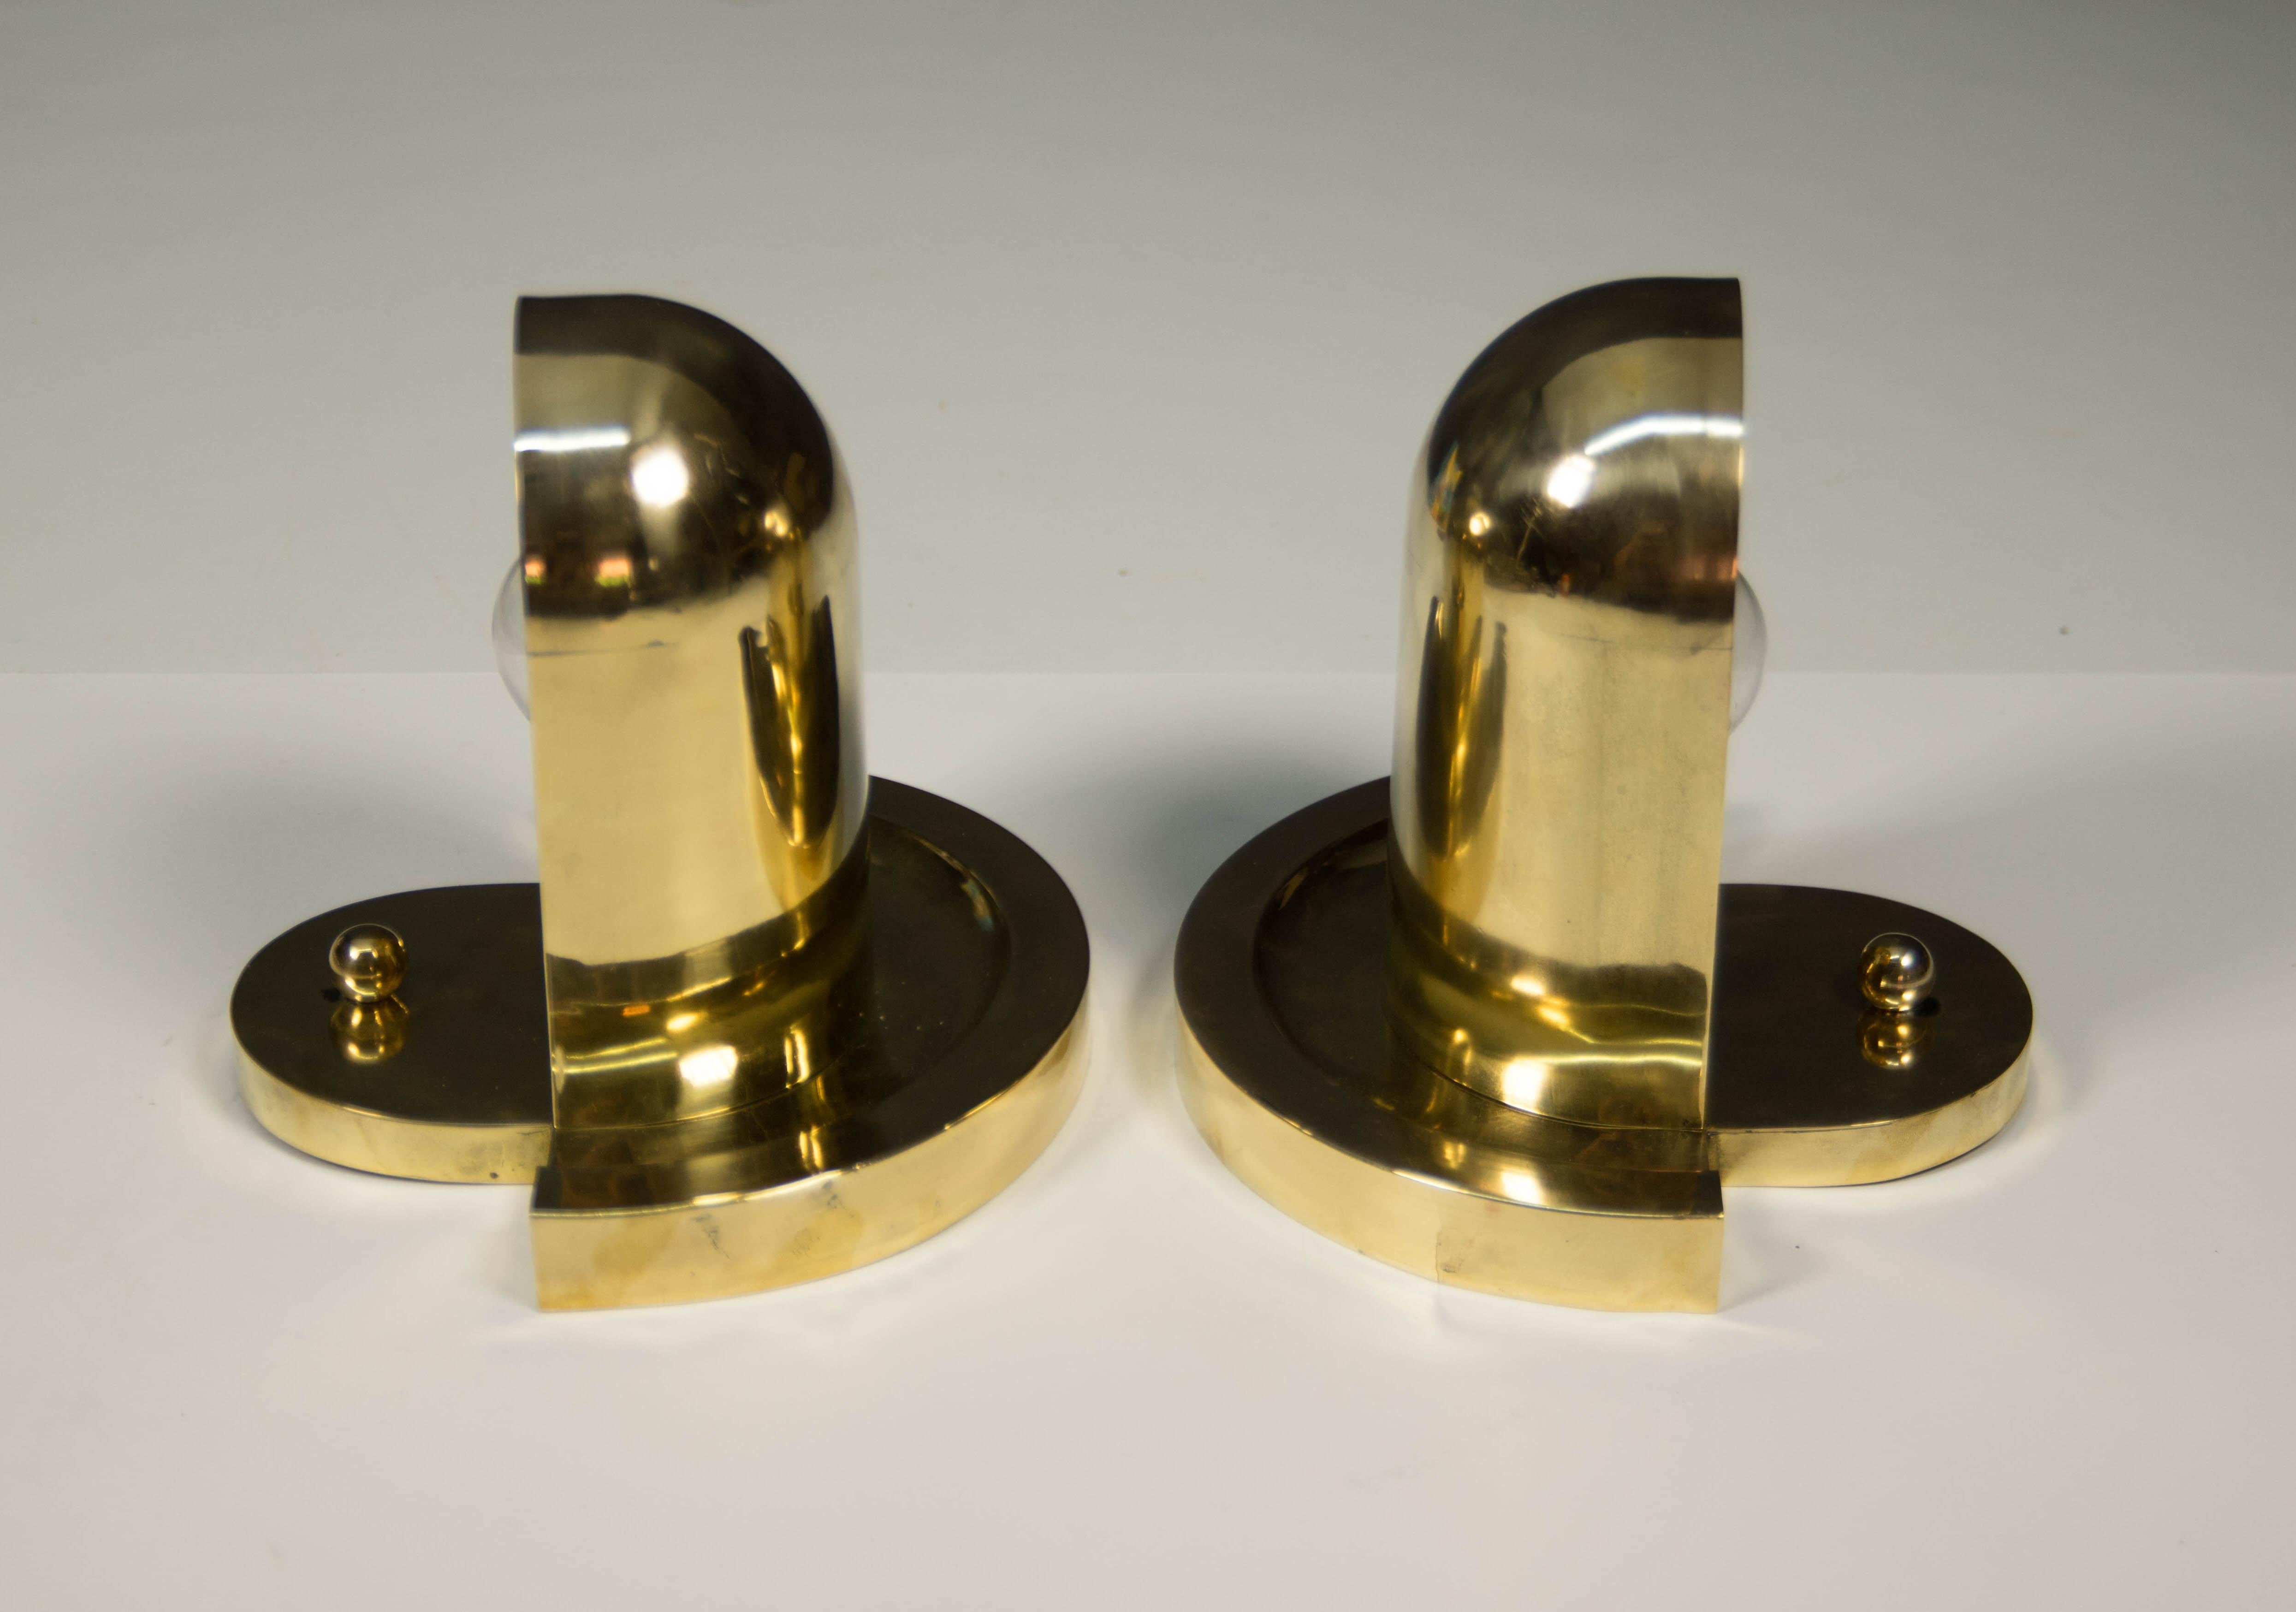 Set of Unique Cubistic Brass Wall Lamps, 1920s For Sale 5